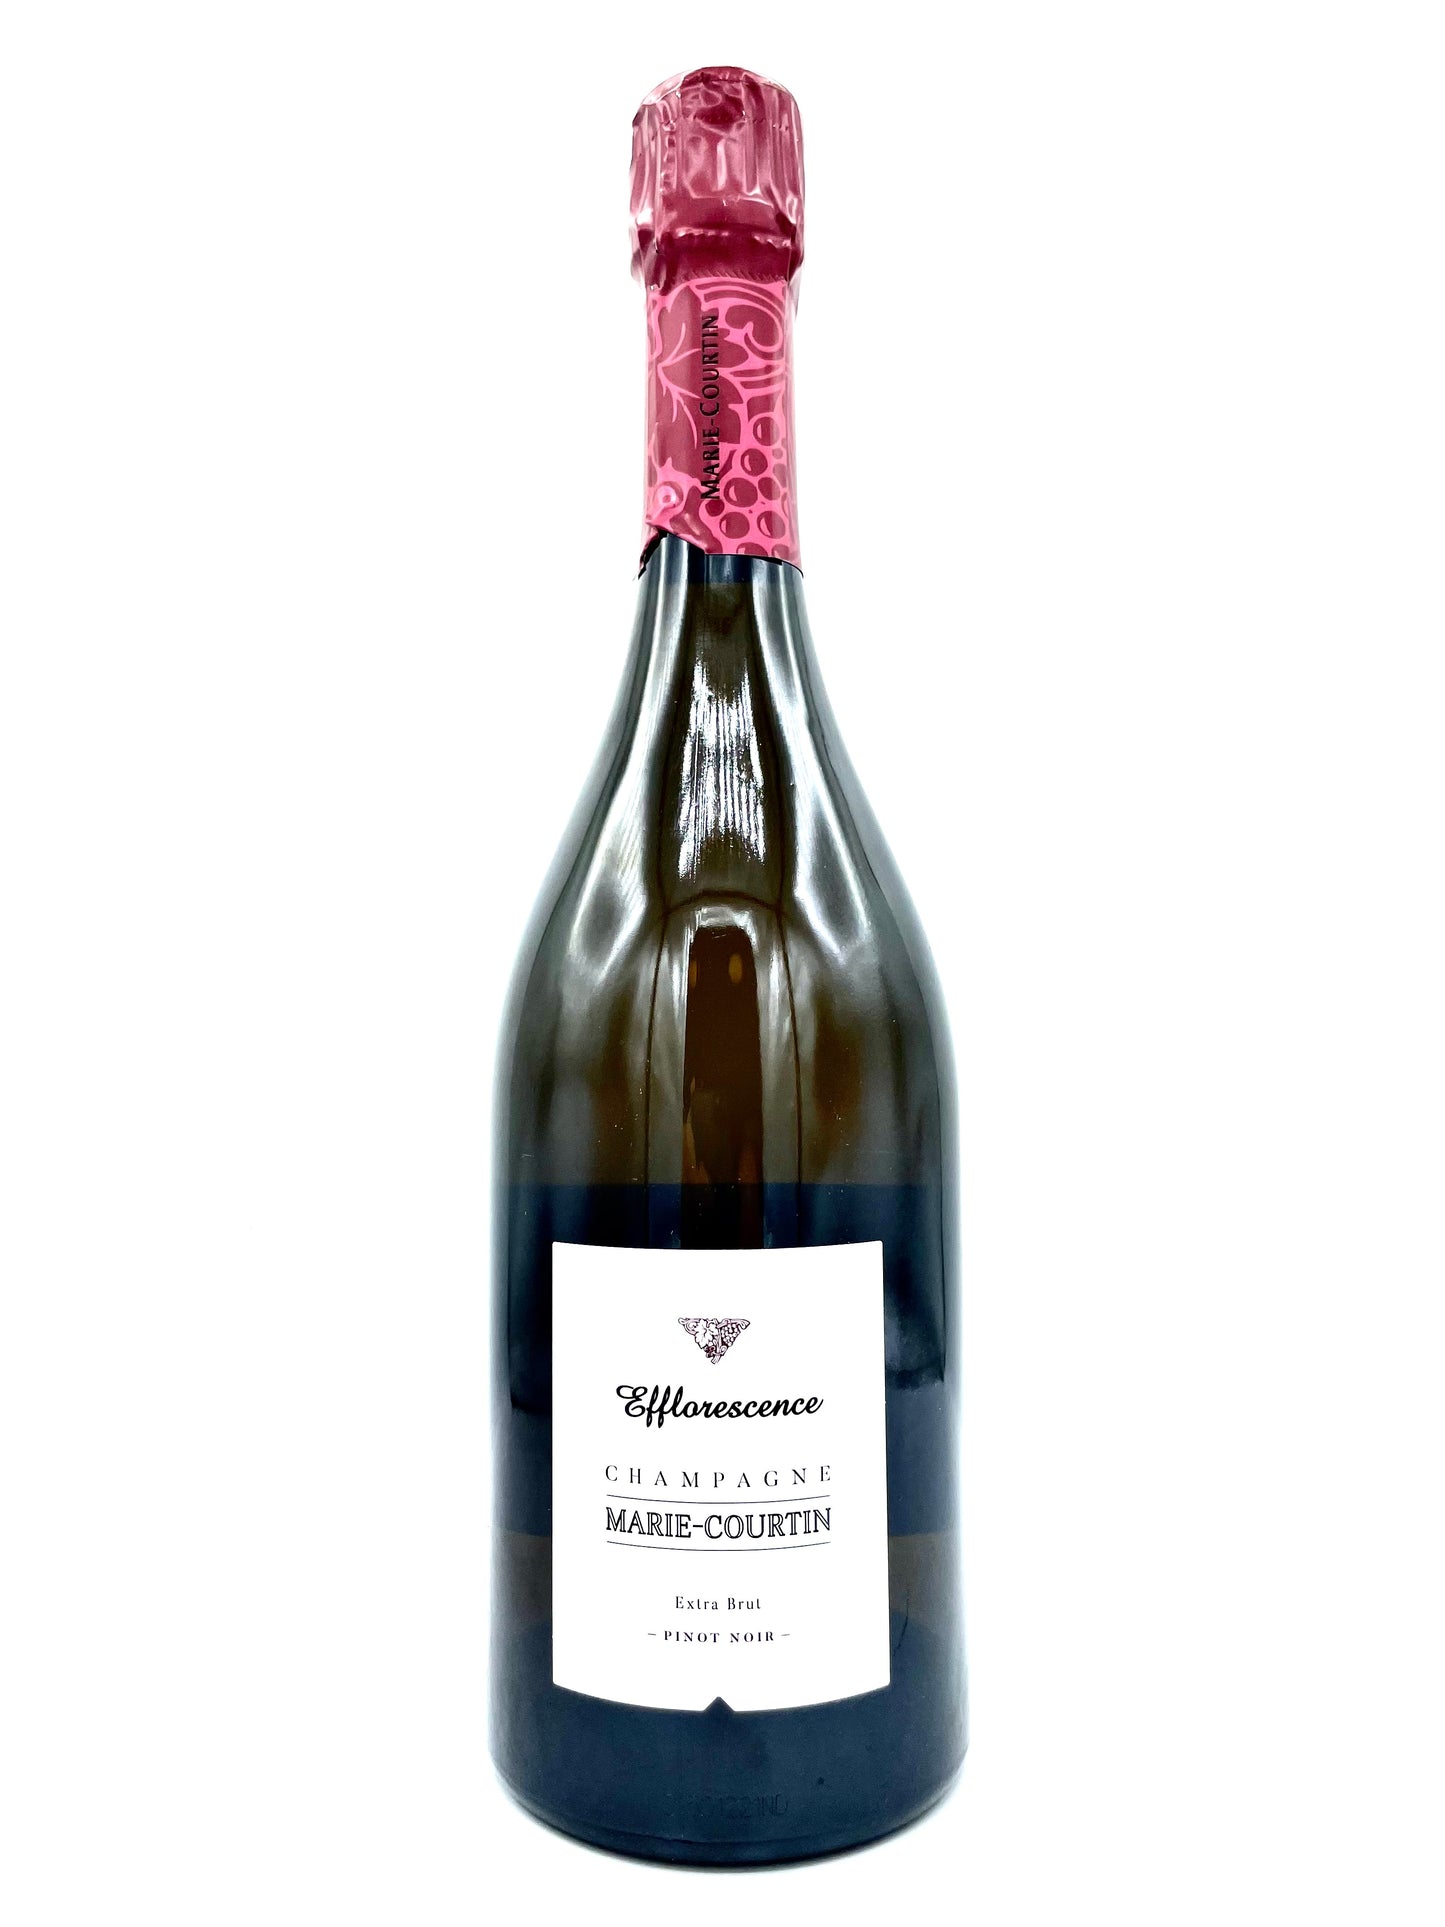 Champagne Marie-Courtin 'Efflorescence' Extra Brut 2016